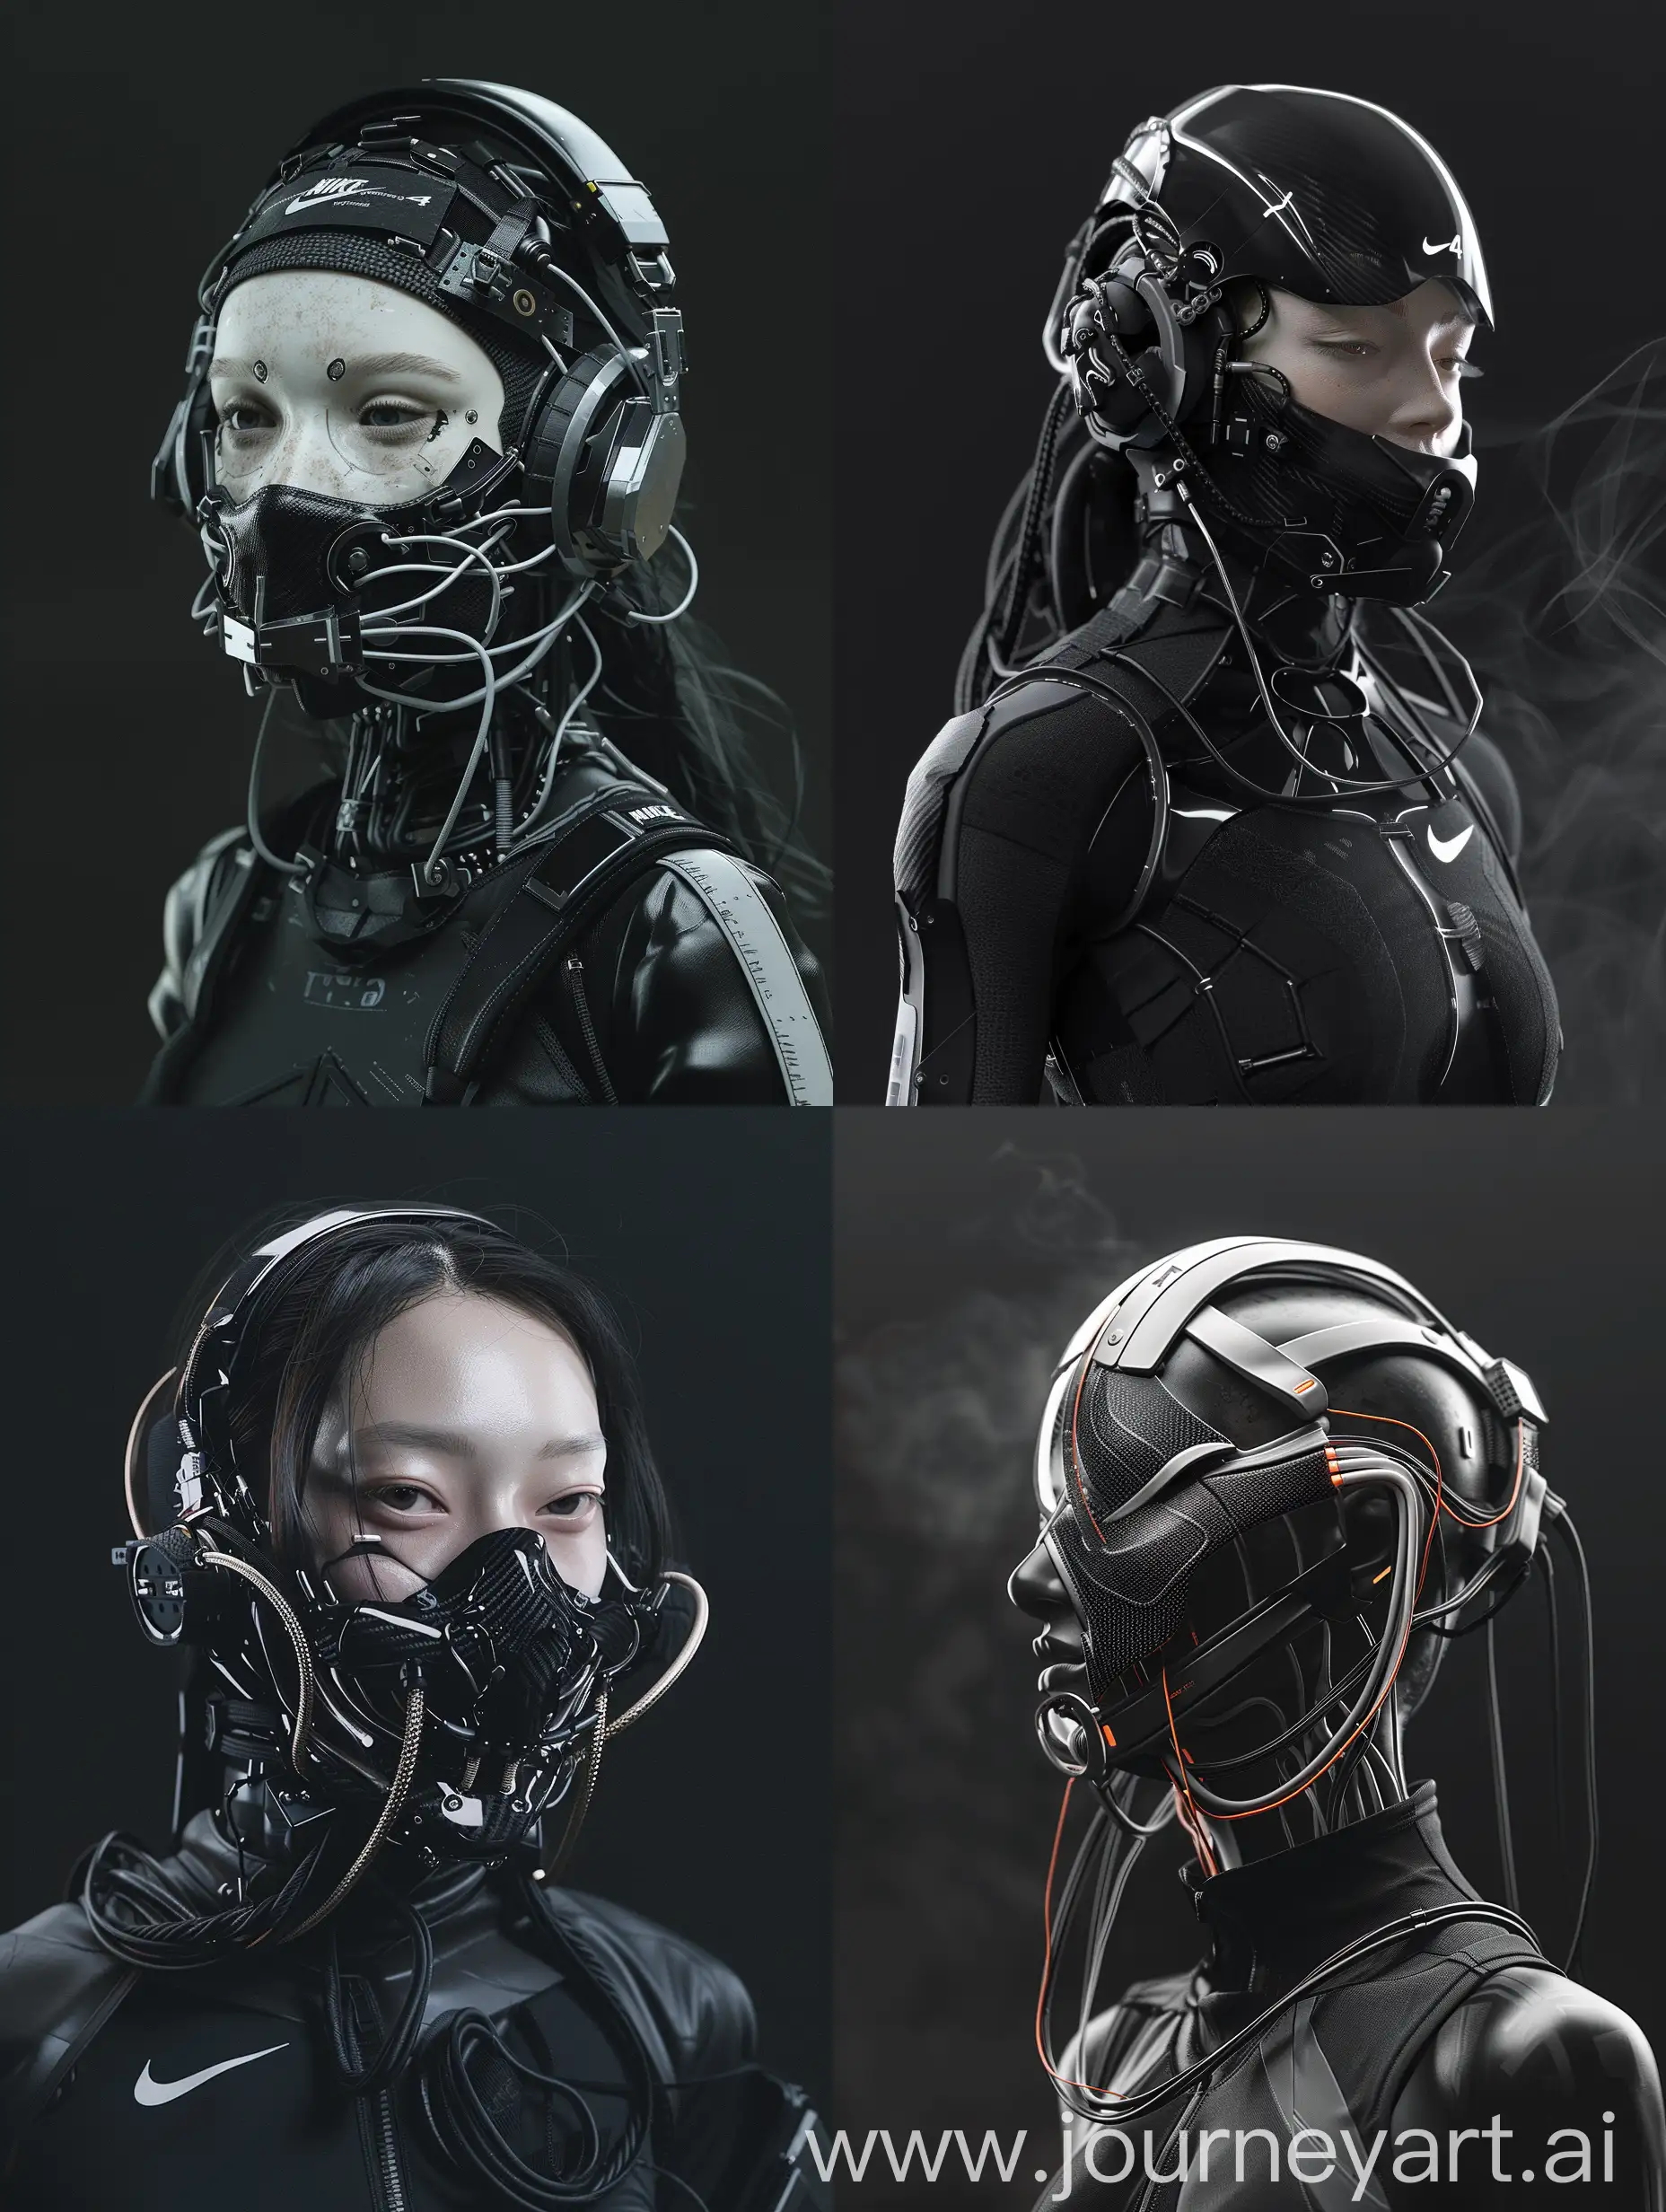 Futuristic-Cyberpunk-Character-with-Intricate-TechMask-and-Athletic-Addons